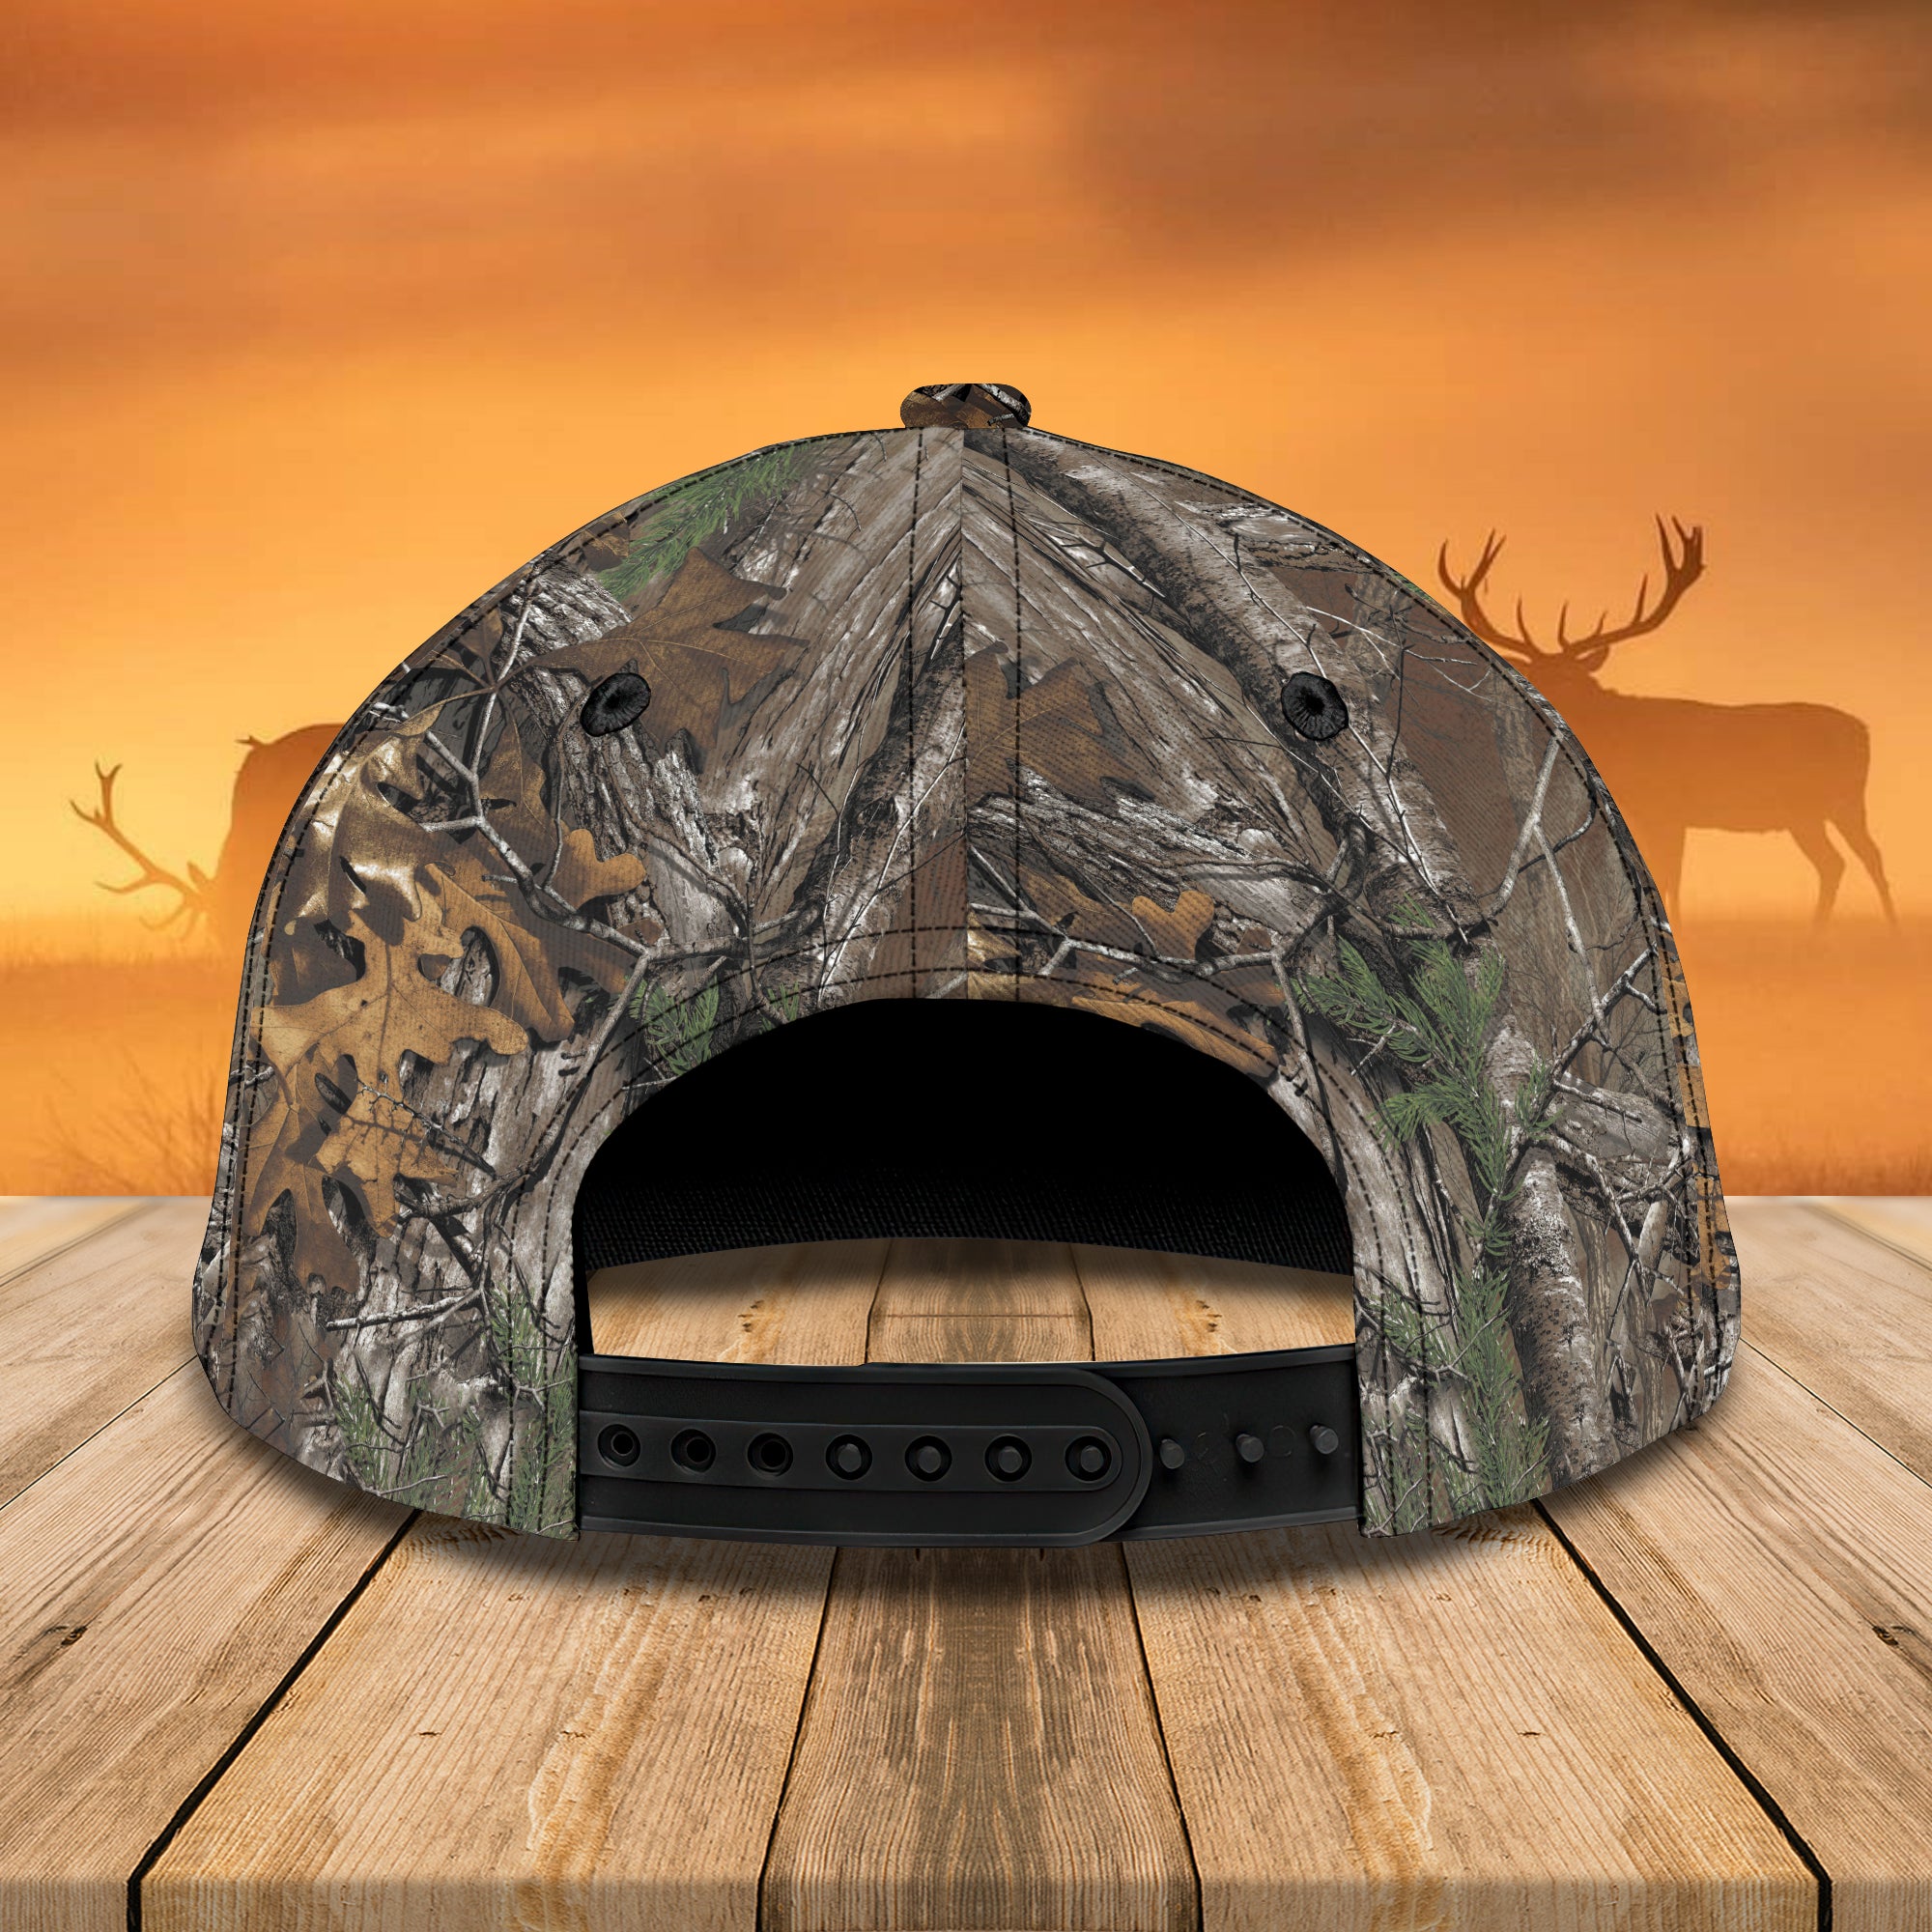 Deer Hunting - Bow Hunting - Personalized Name Cap 7 - Nvc97